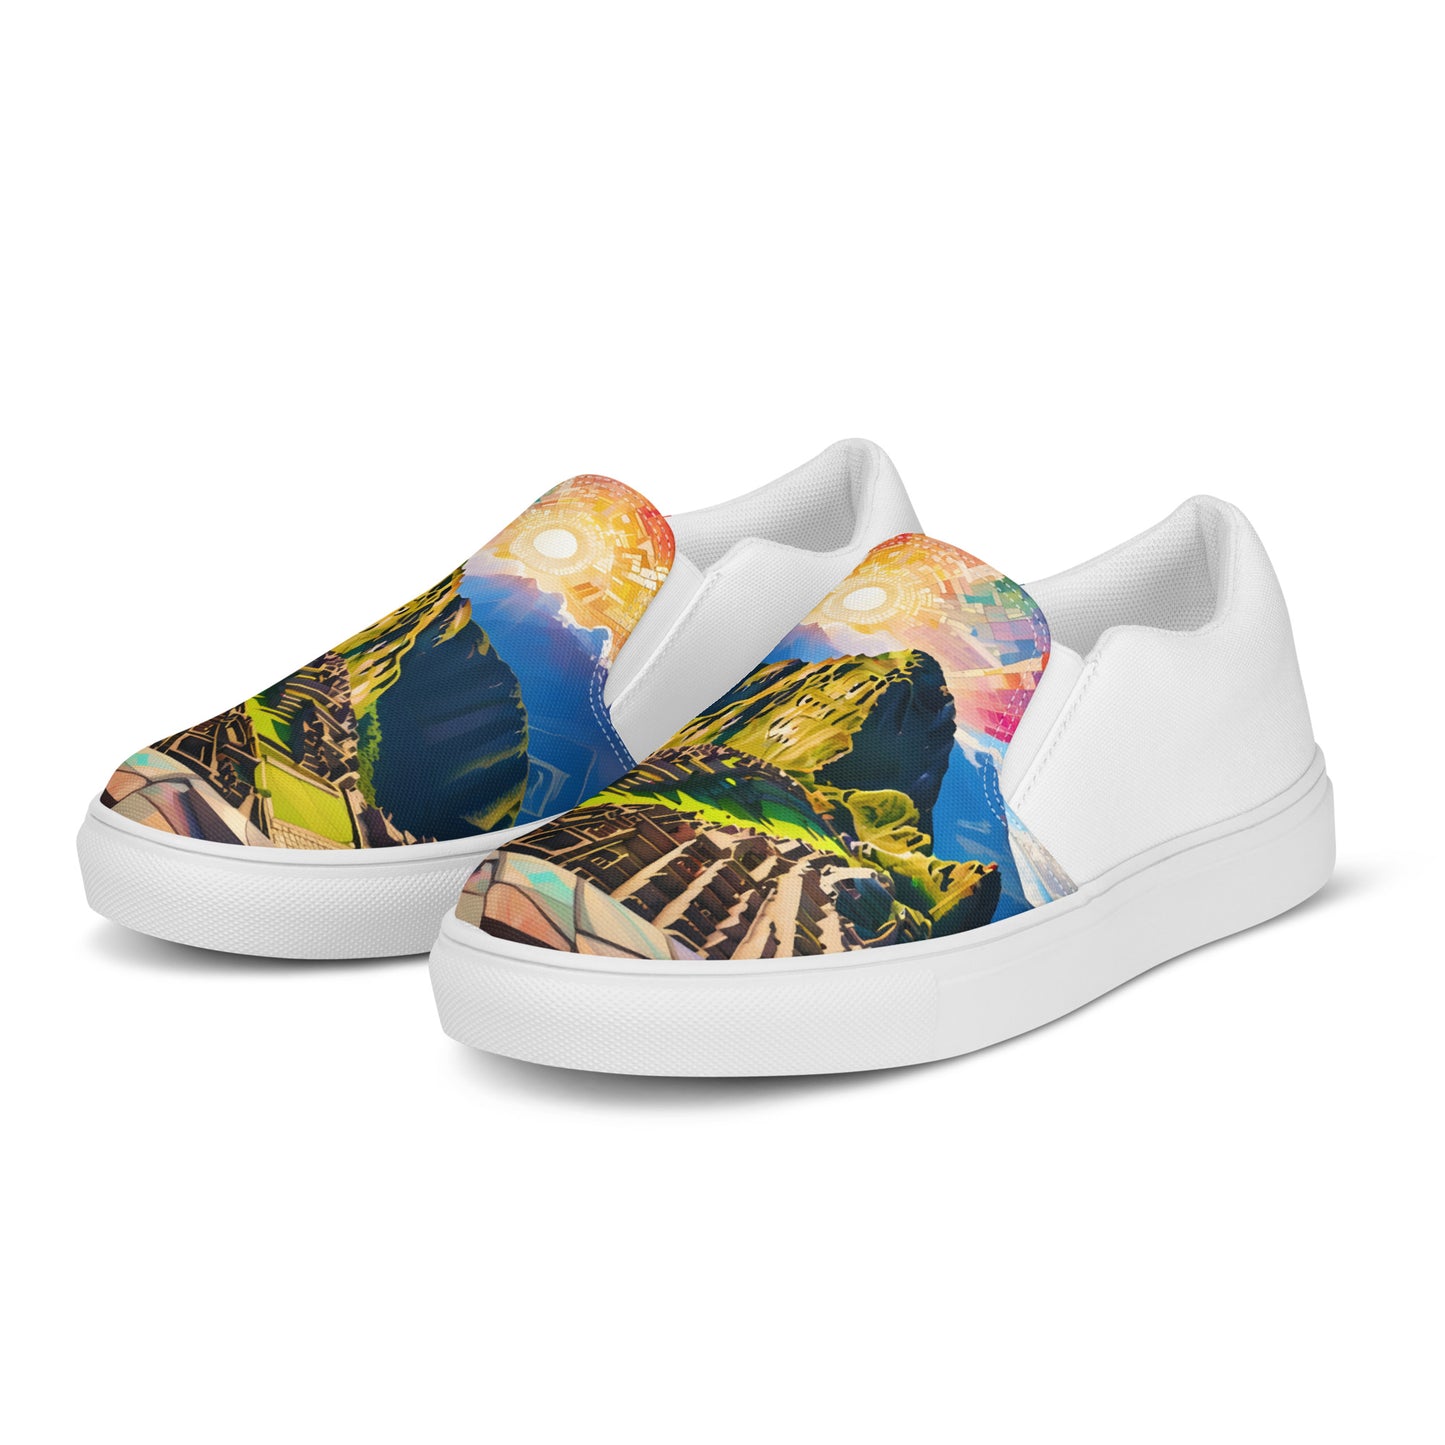 Machu Picchu - Stained glass - Men - White Slip-on shoes